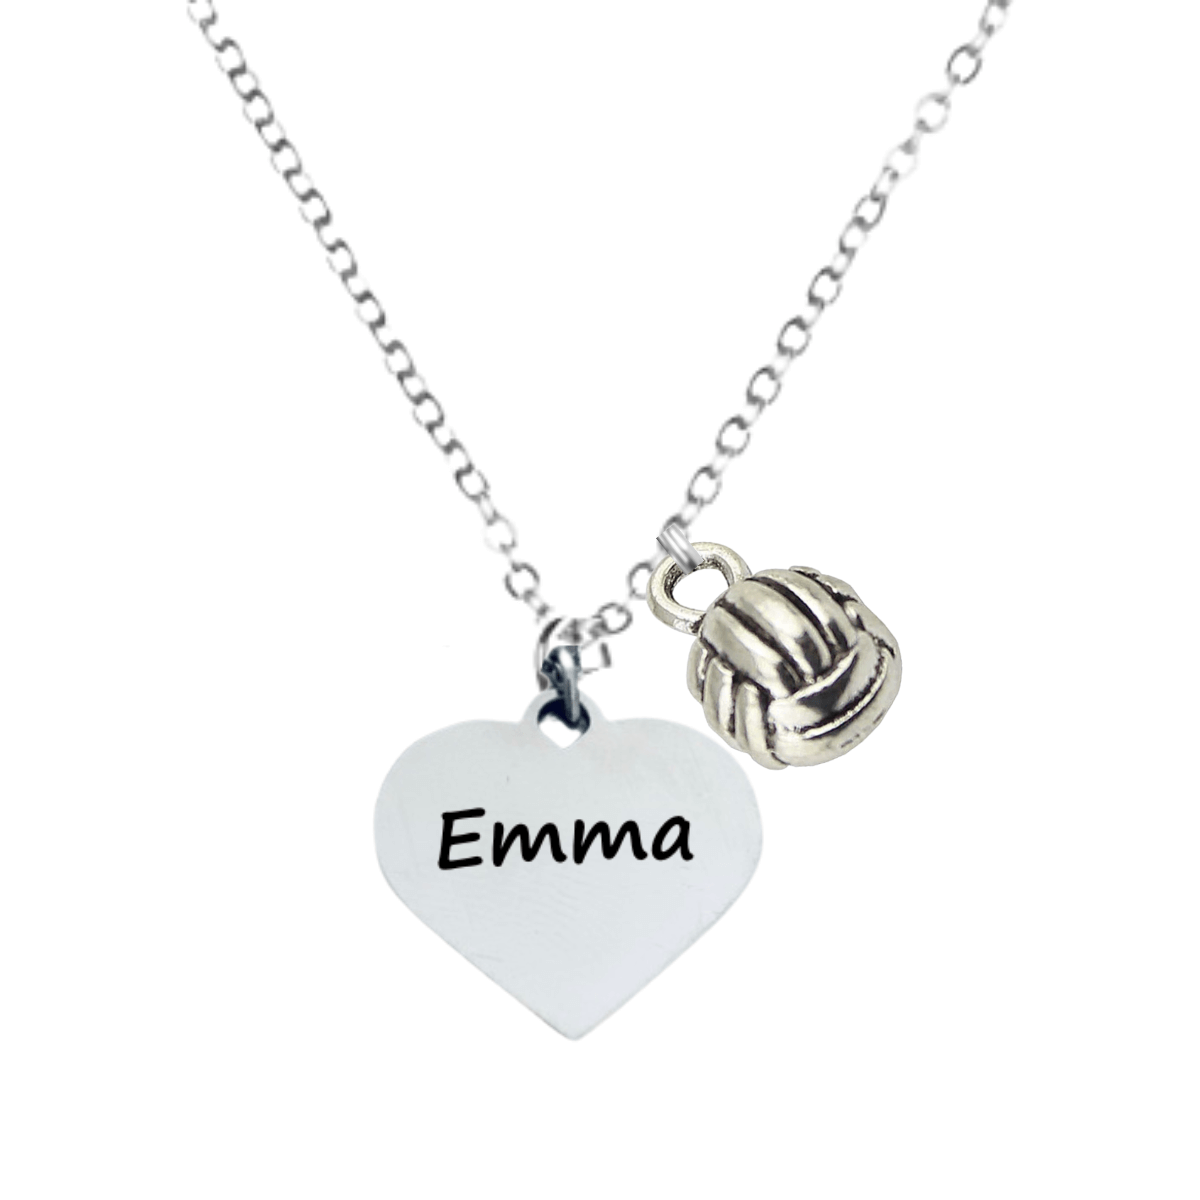 Personalized Volleyball Necklace with Volleyball Ball Charm